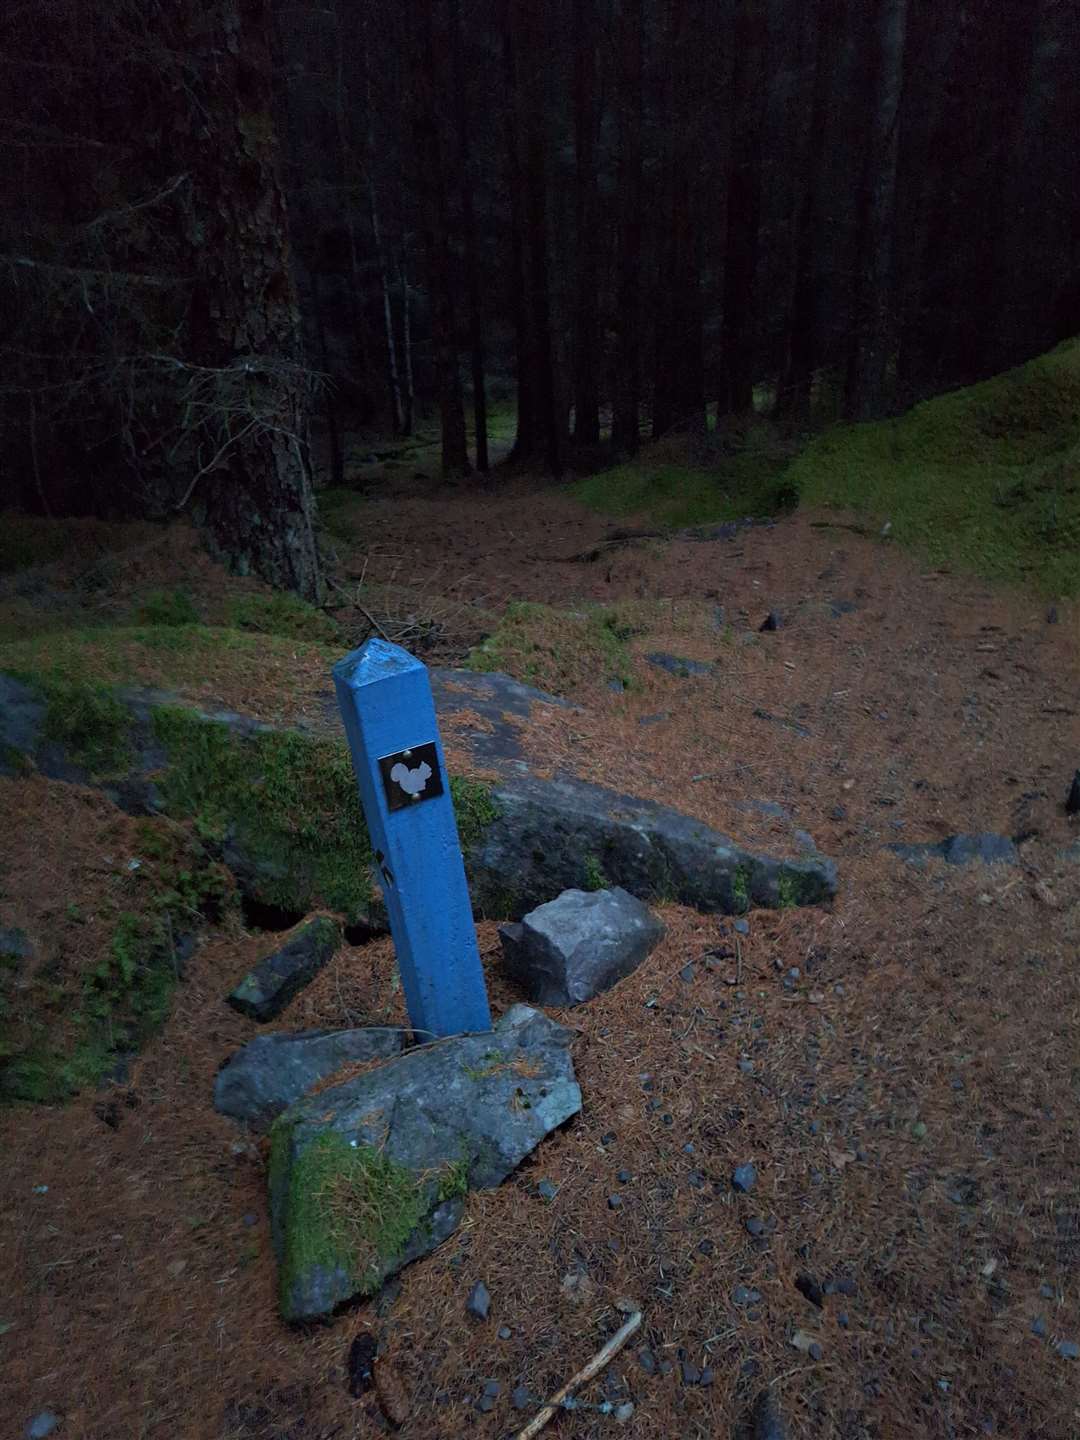 Heading into the dark, dark woods at a blue marker post for the South Loch Ness Trail.